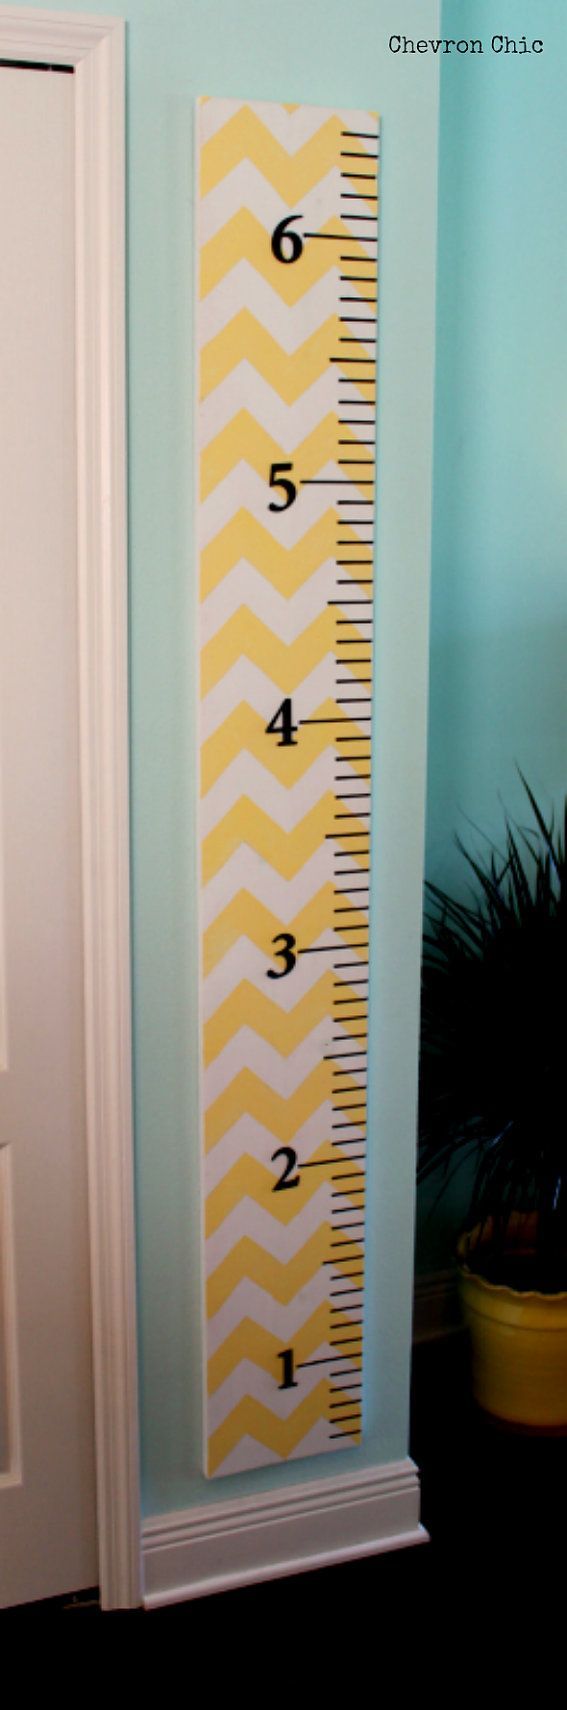 Over sized Growth Ruler  Chevron Chic by ChevronChicFL on Etsy, $50.00